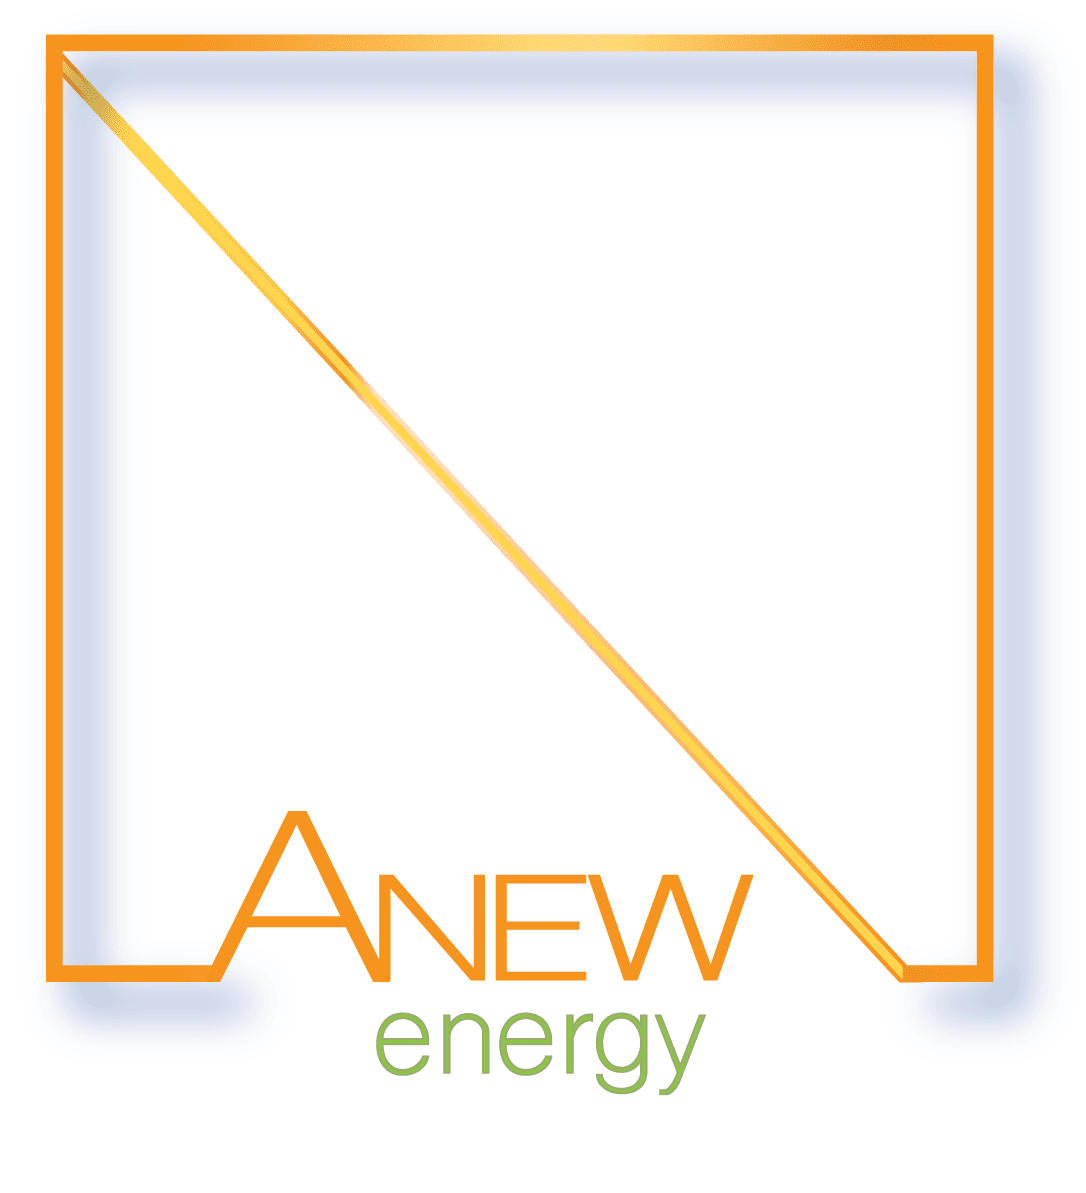 www.anewenergy.co